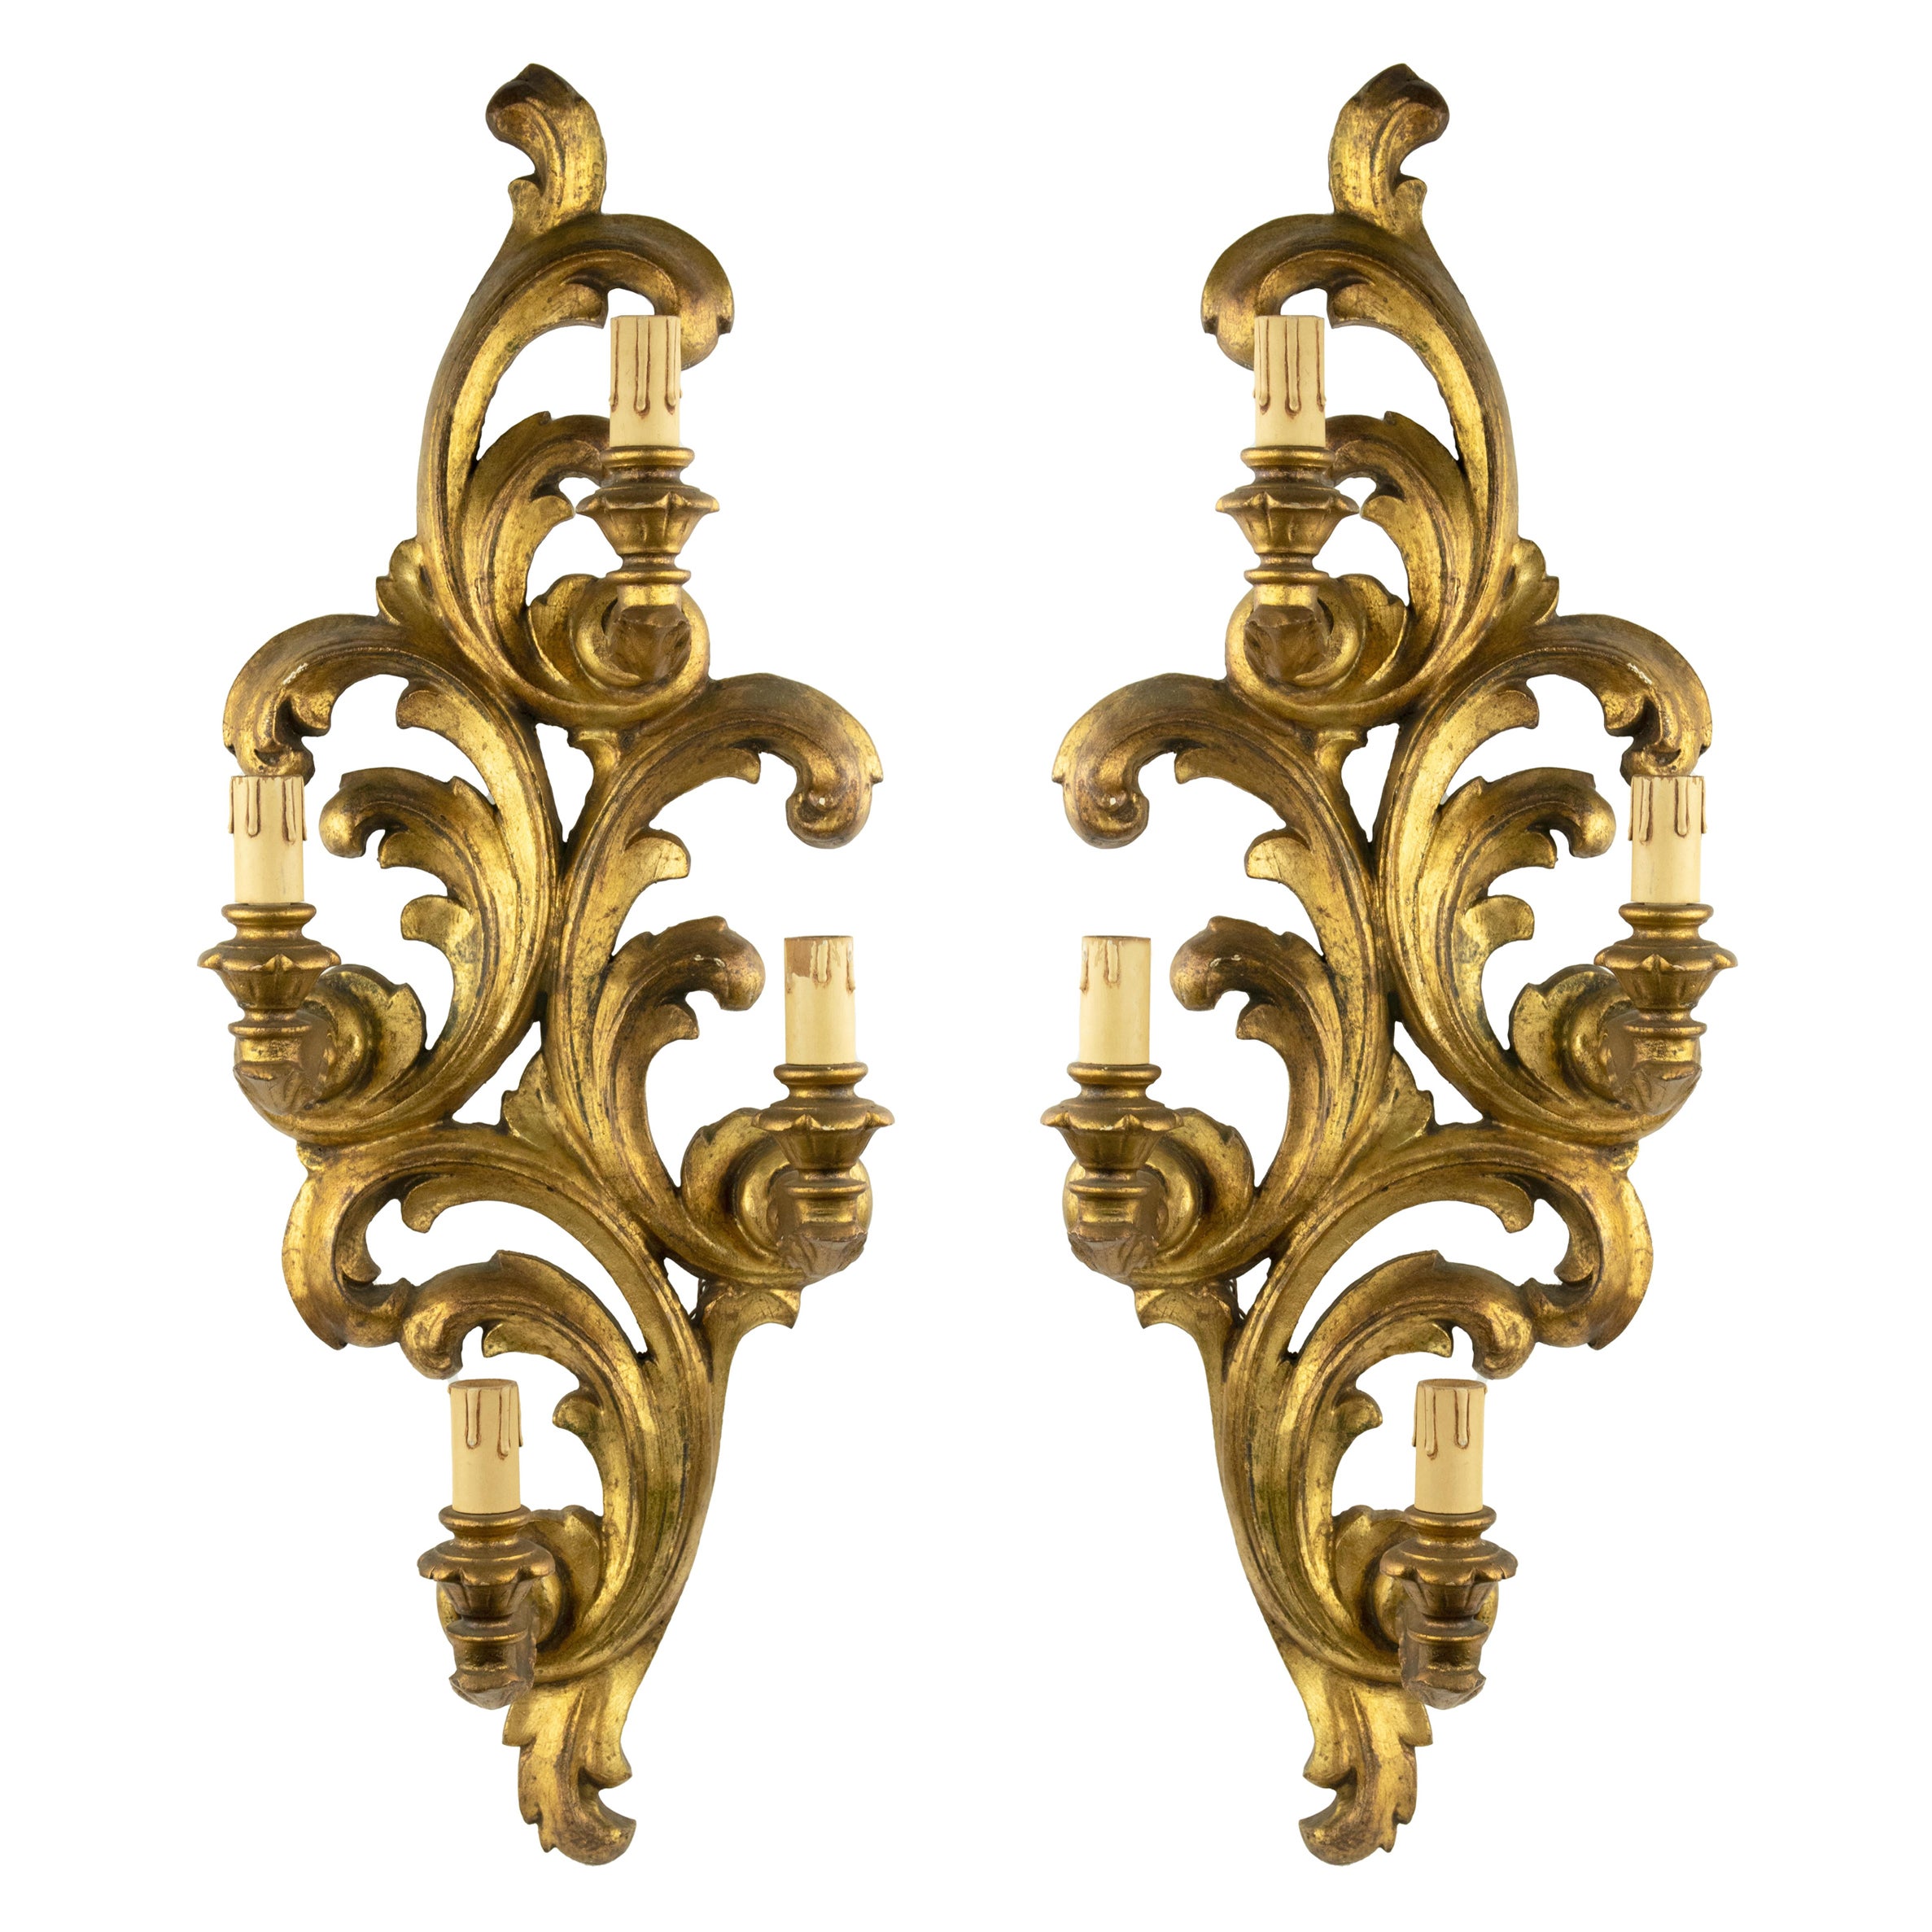 Pair of Ancient Gilded Wood Appliques, Italy, late 19th Century.